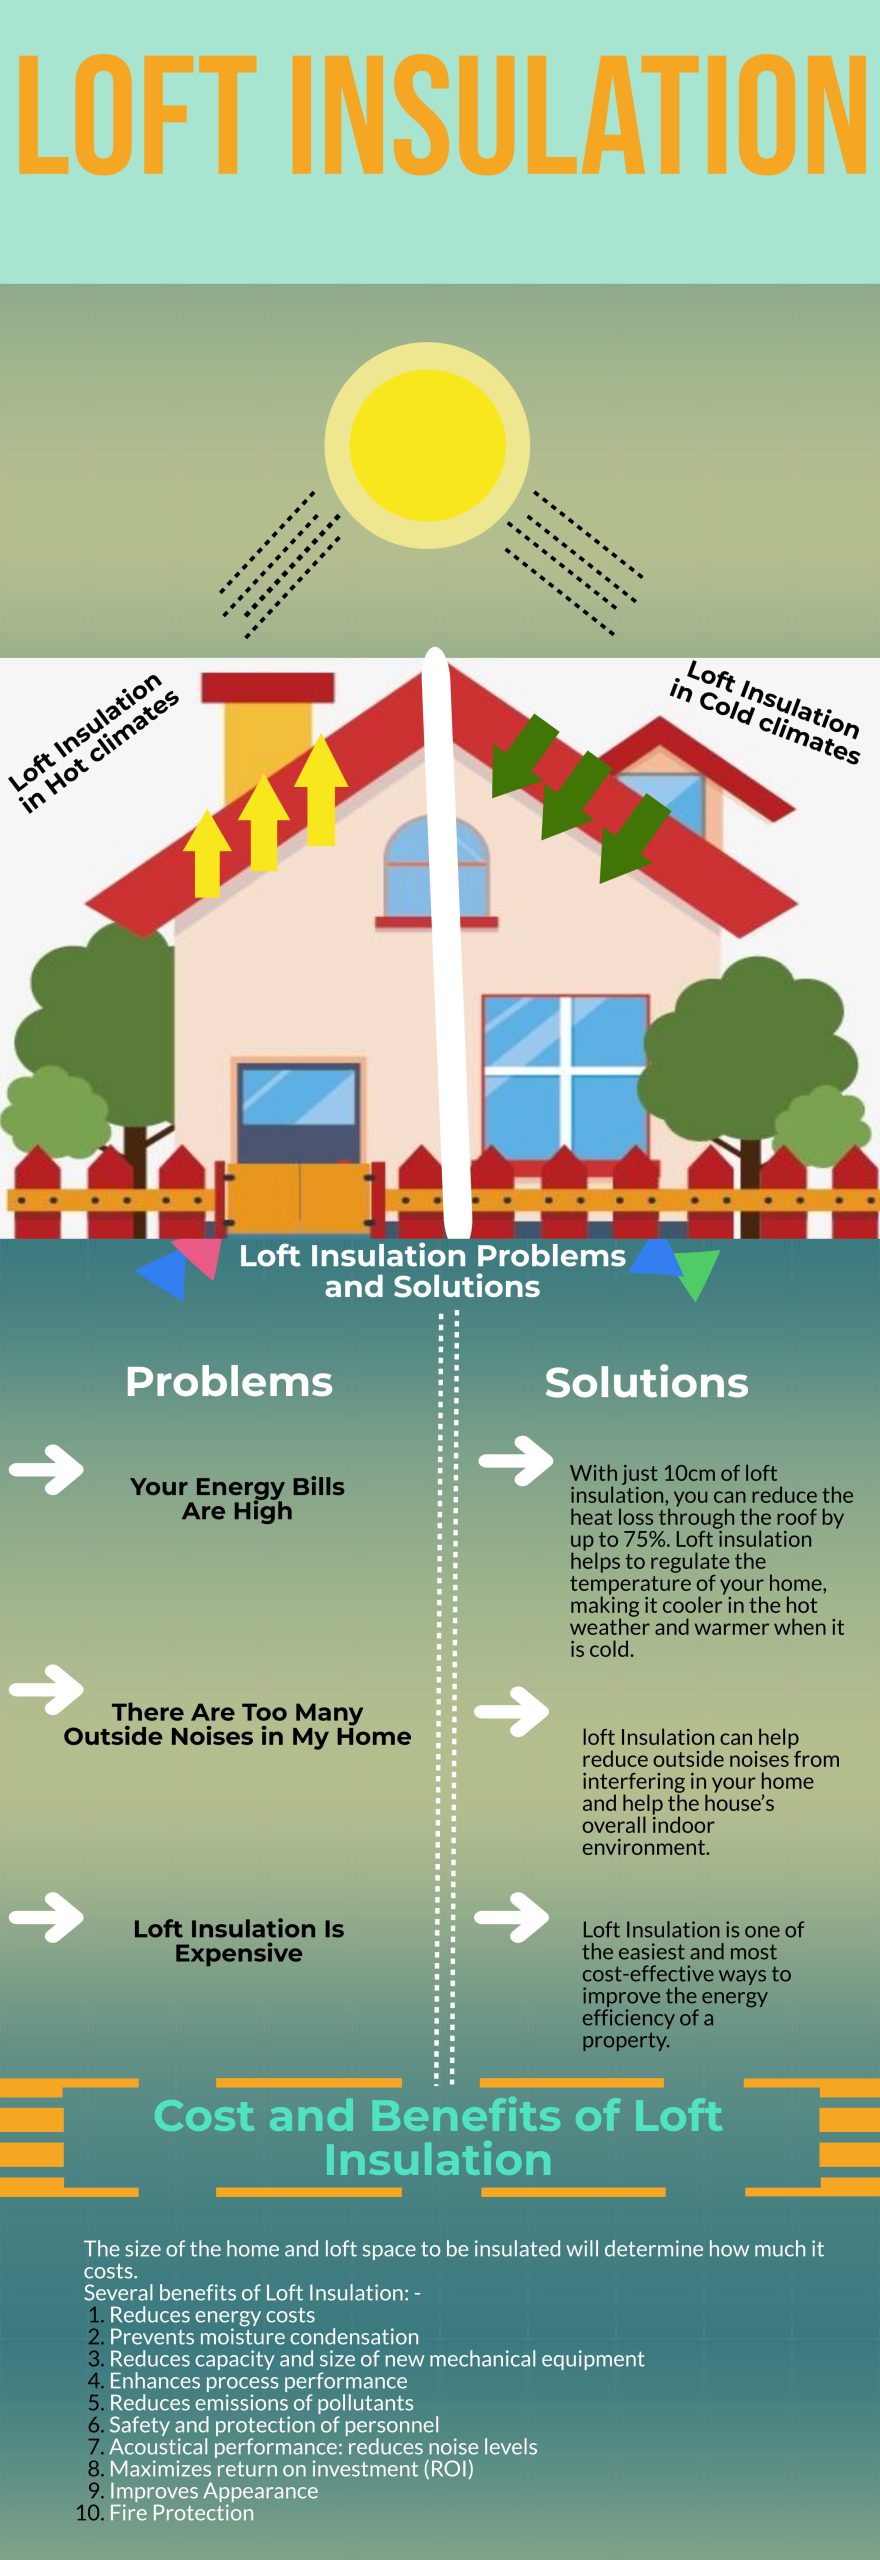 overview of loft insulation costs and benefits